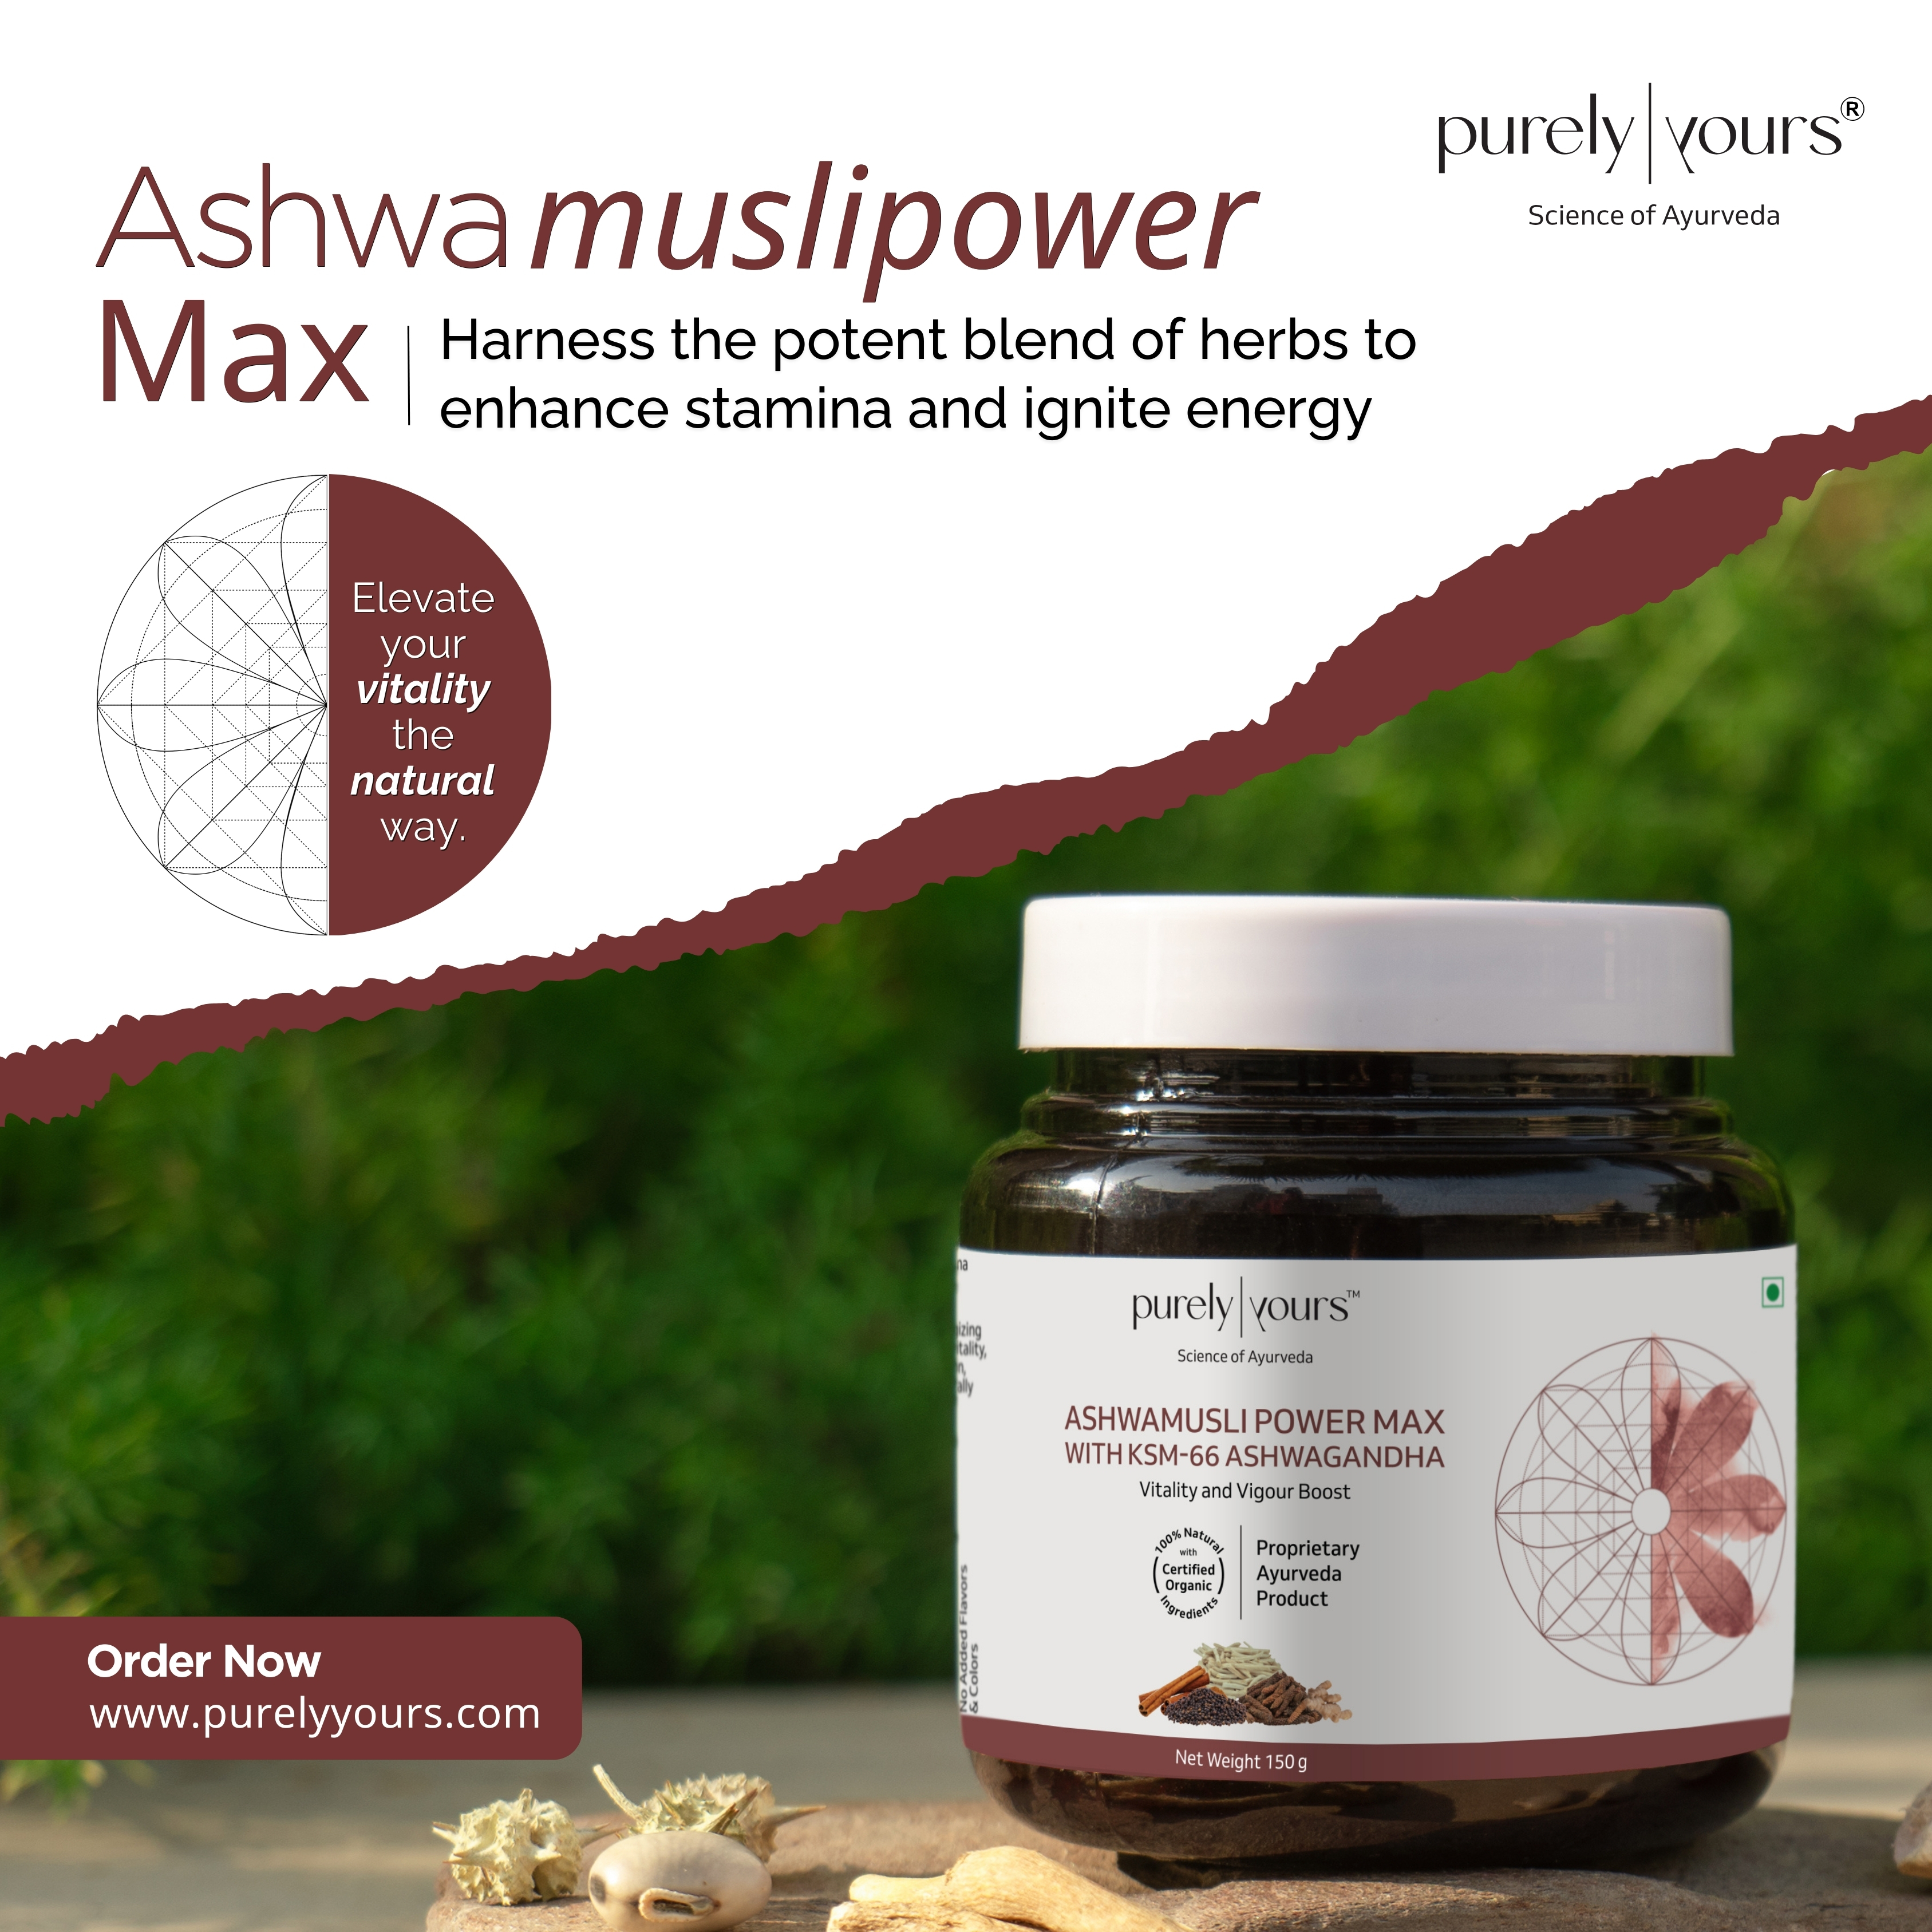 How do I boost the testosterone level with Ayurveda?